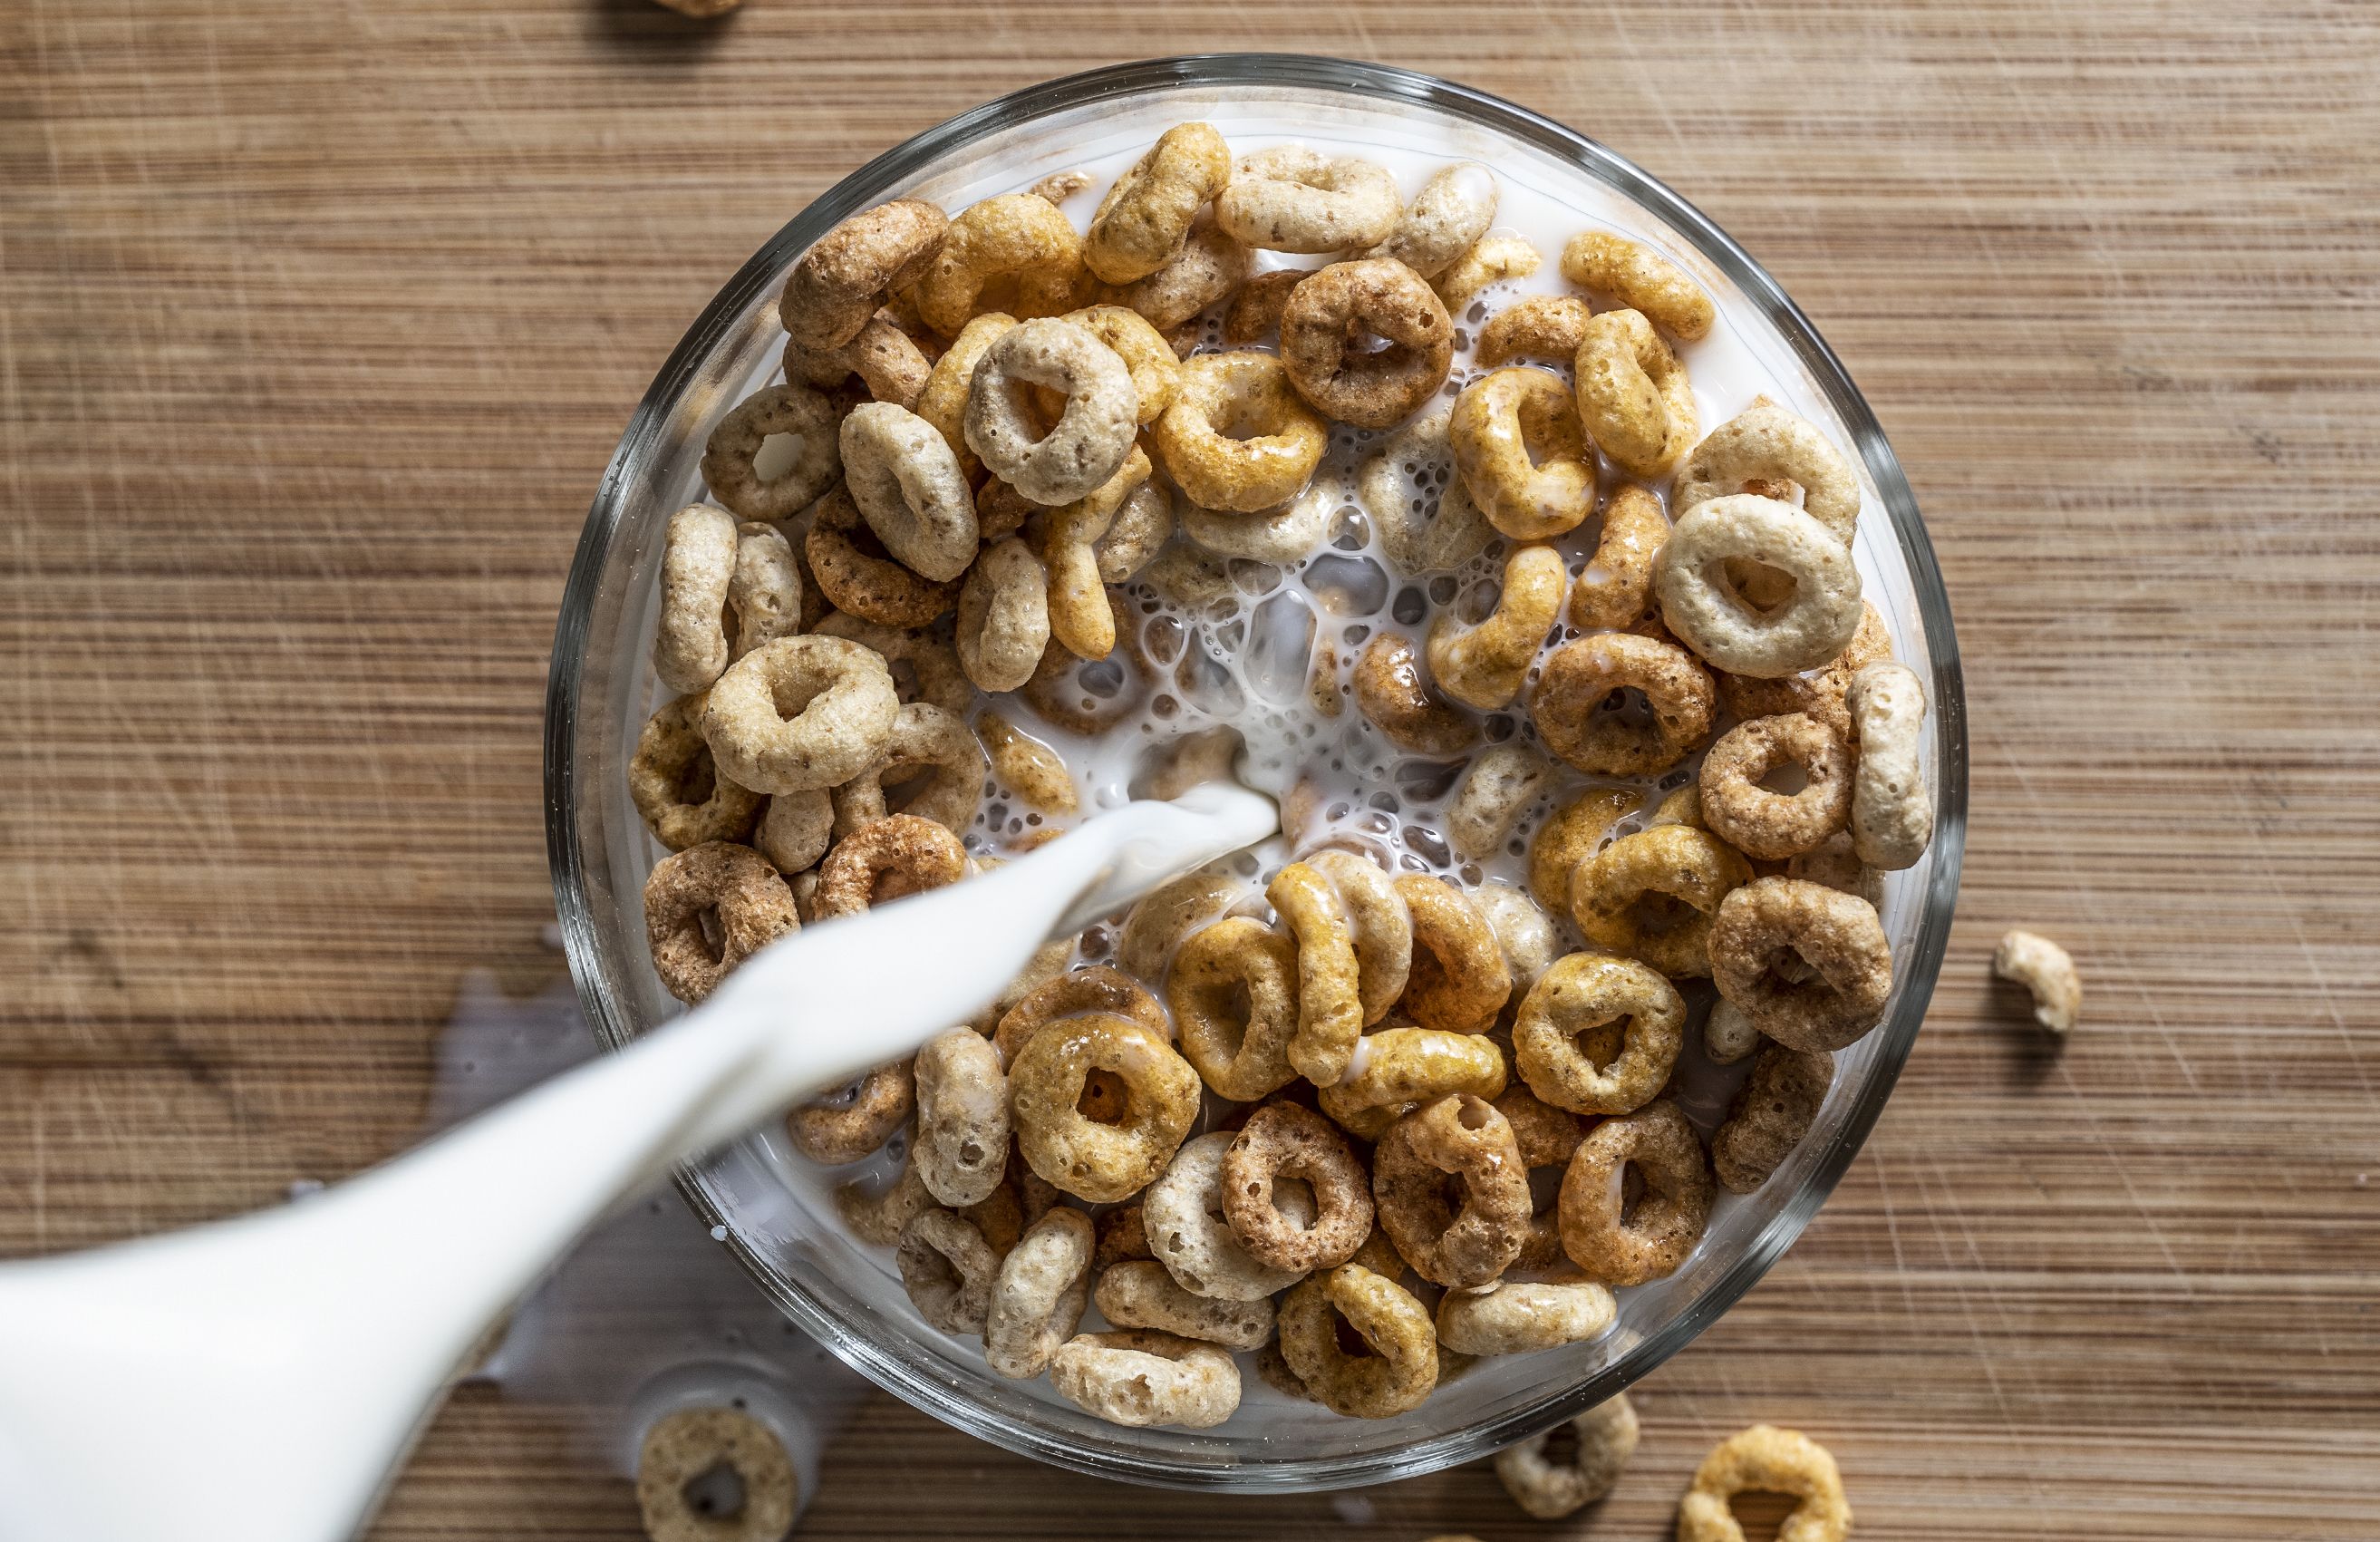 10 Best Low-Sugar Cereals, According to Nutrition Experts